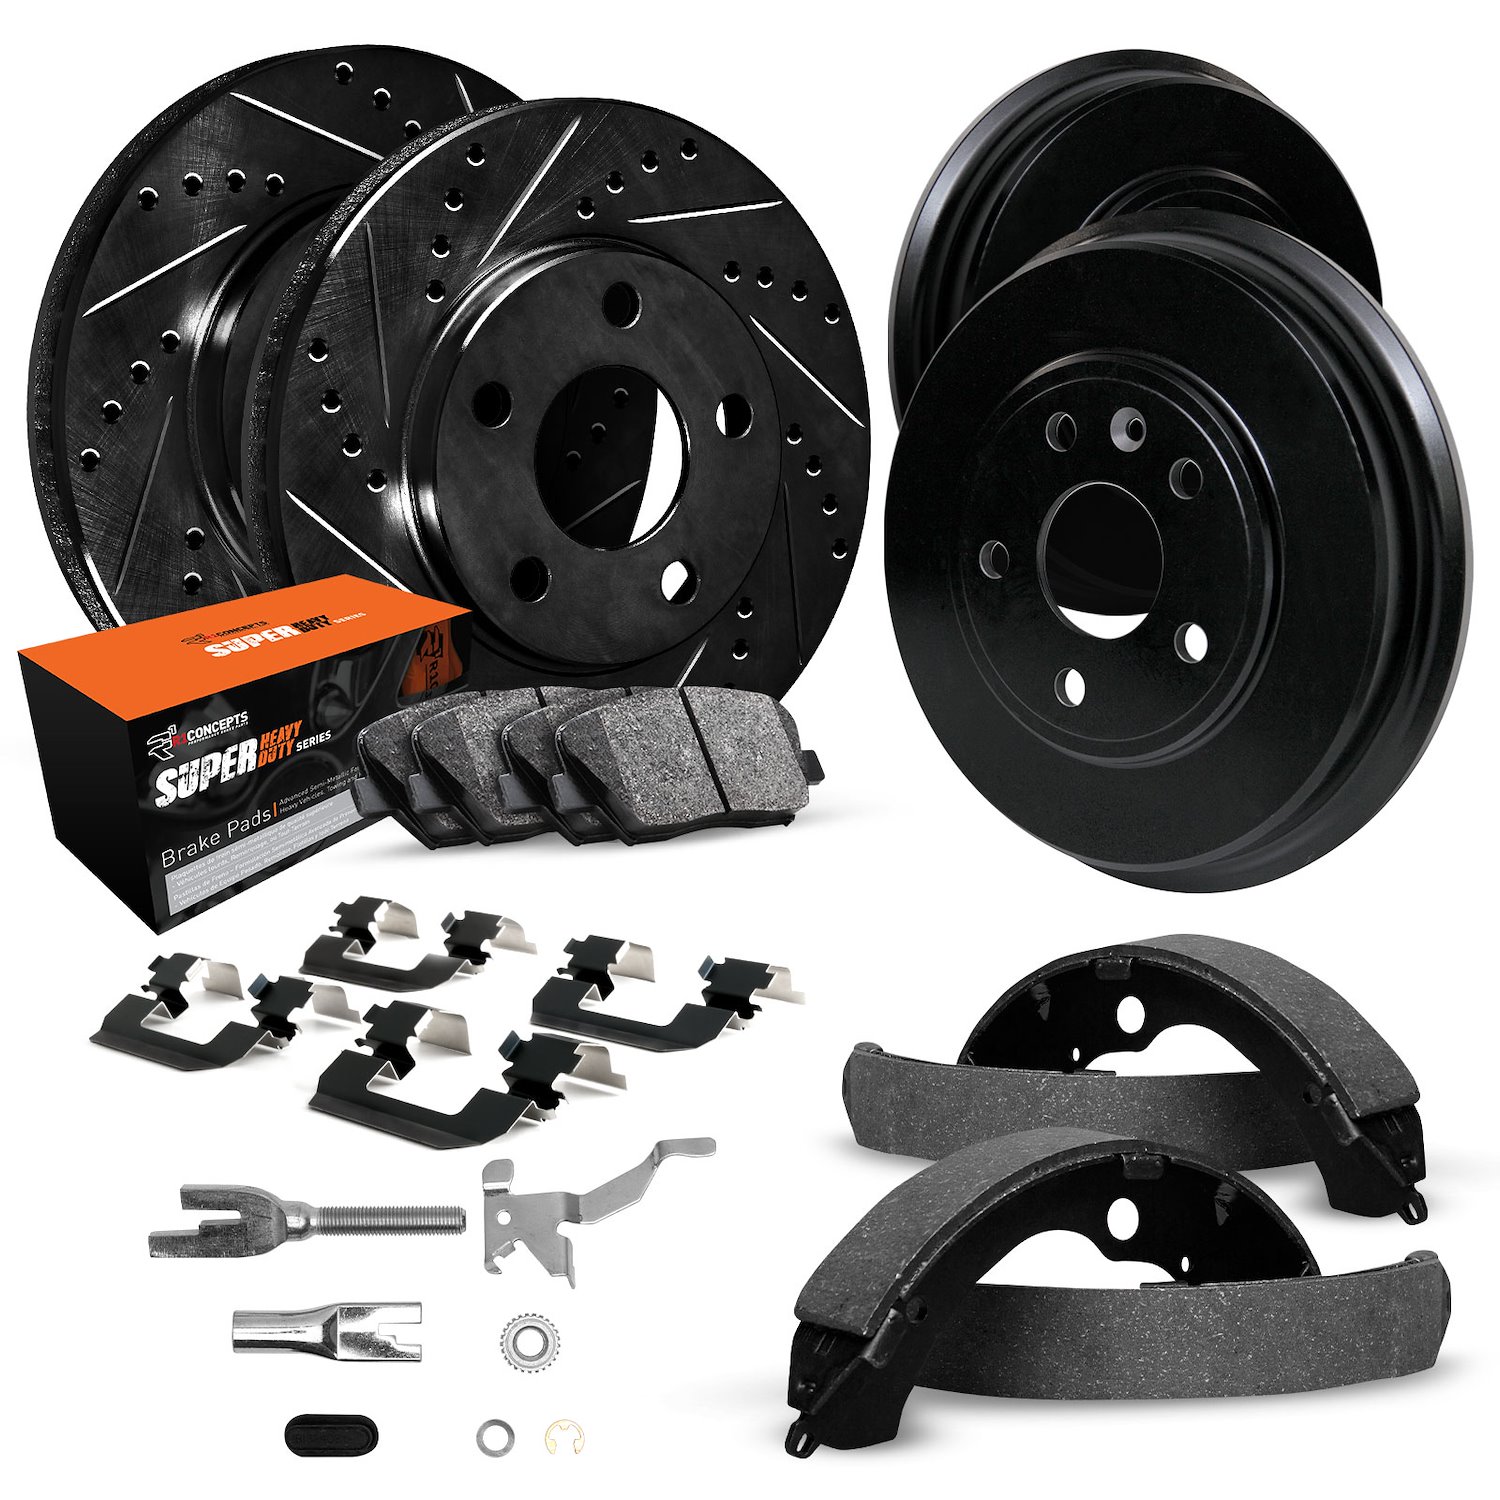 E-Line Drilled/Slotted Black Rotor & Drum Set w/Super-Duty Pads, Shoes, Hardware/Adjusters, 1977-1979 Ford/Lincoln/Mercury/Mazda